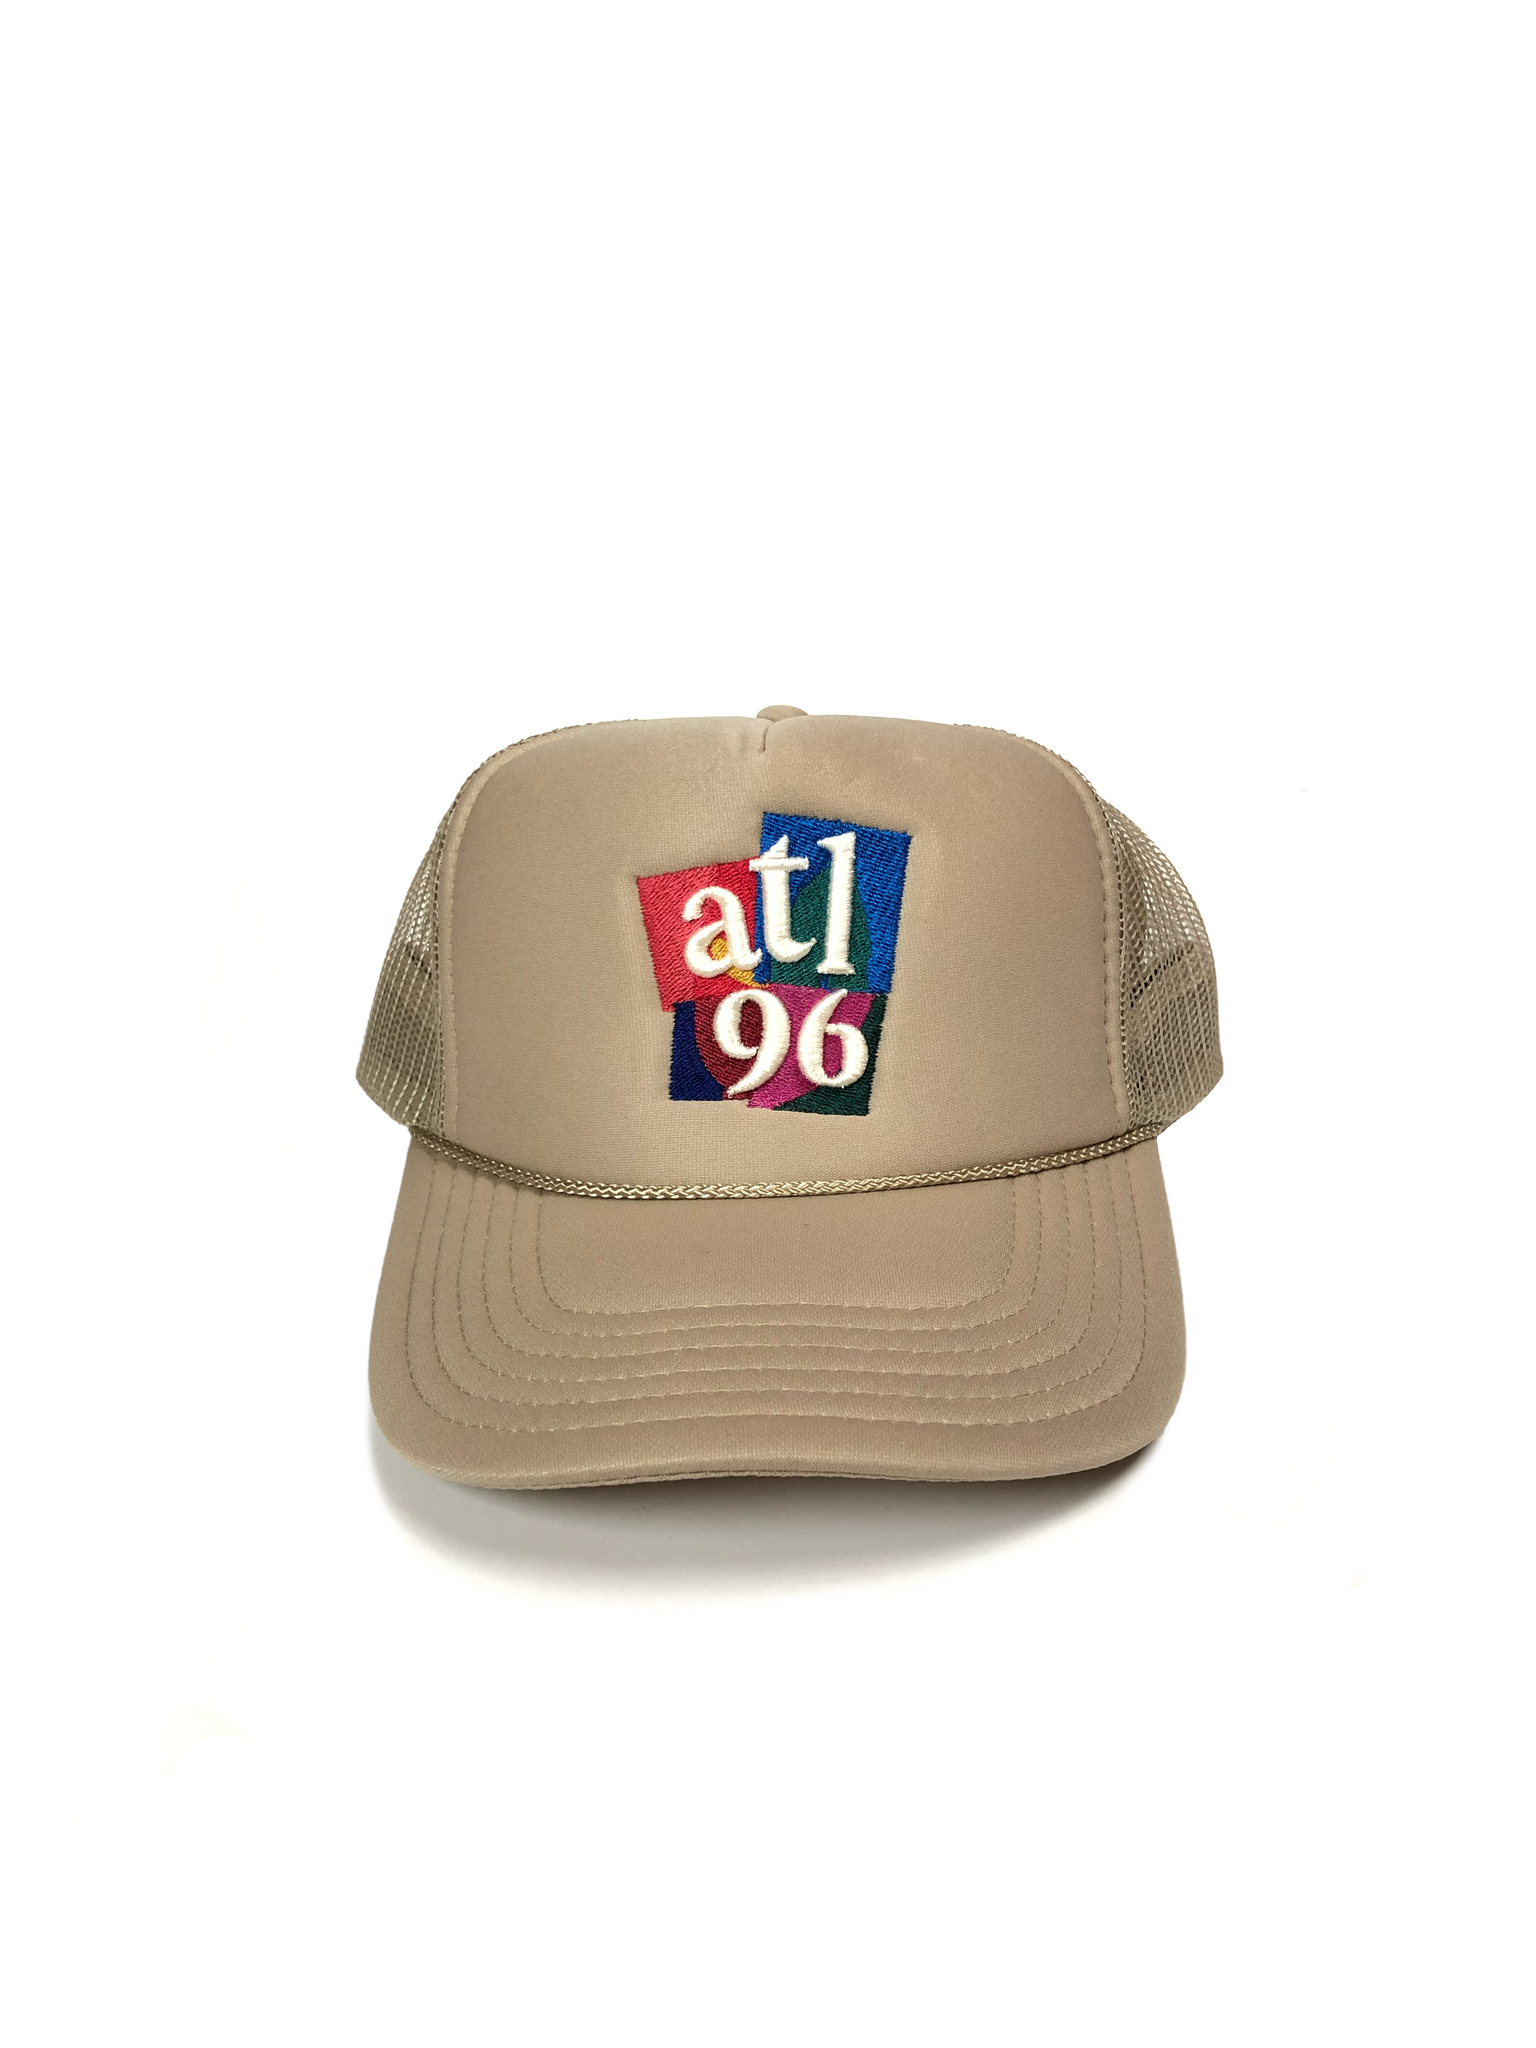 atl1996 Stacked '96 'Opening Ceremony' Trucker Hat